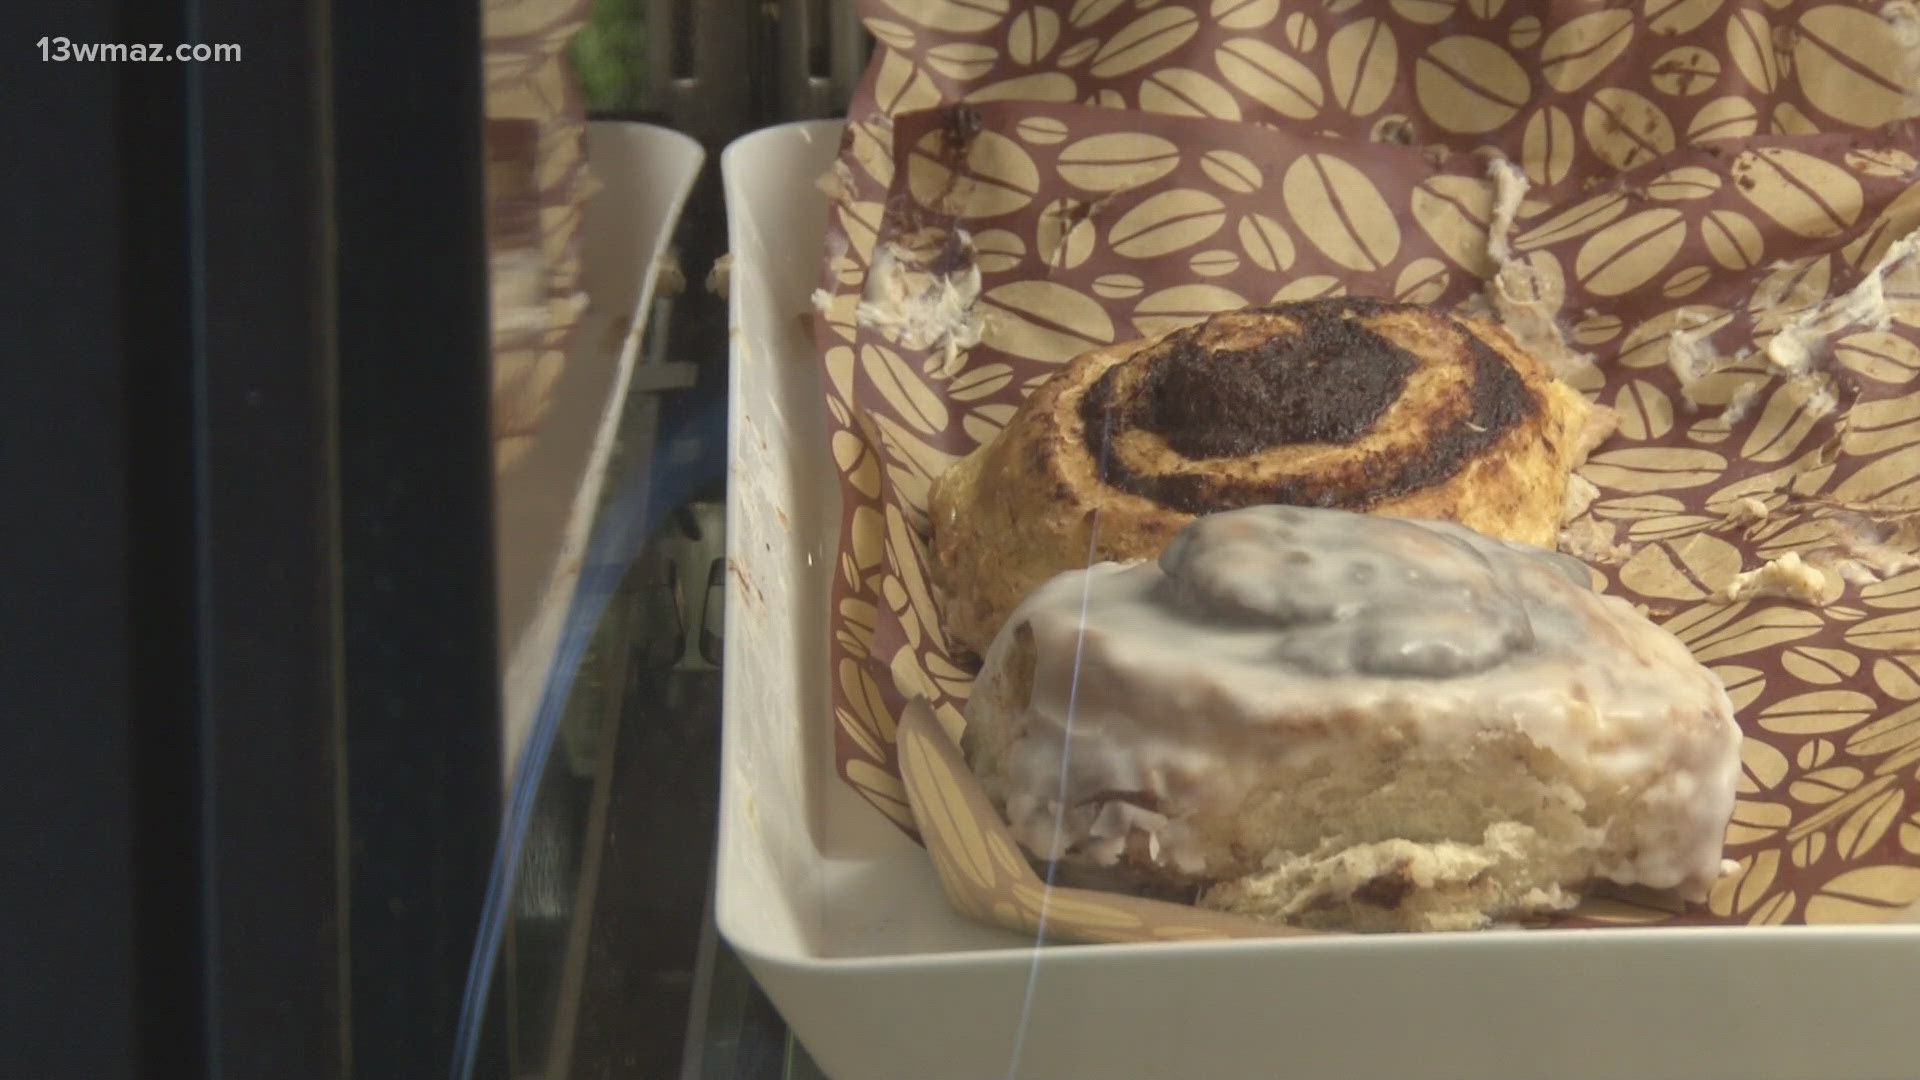 16 small businesses around Macon are competing with each other for the best dessert option they're temporarily adding to their menu this week.